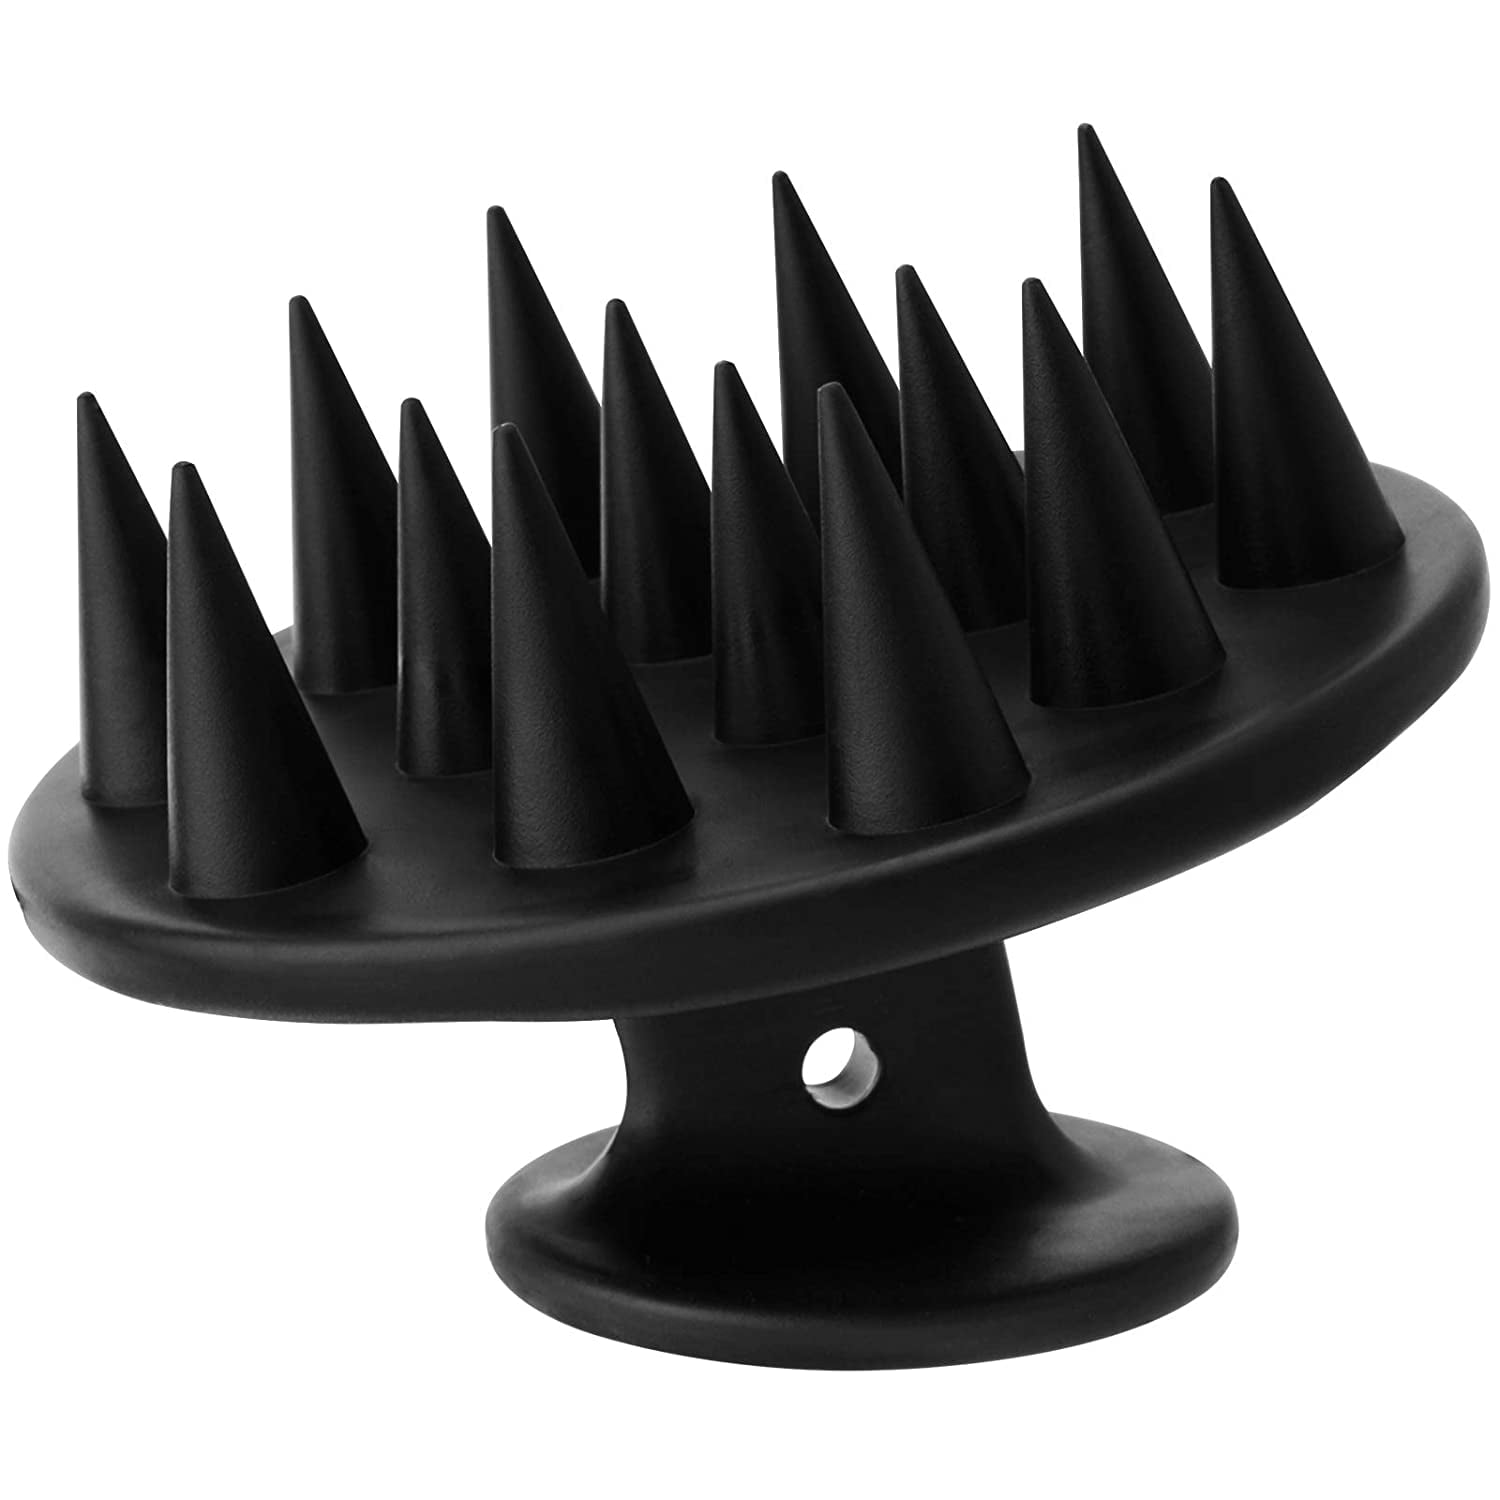 FReatech Updated Hair Scalp Massager Shampoo Brush, Integrated SIlicone  Head Scrubber, Long and Stiff Node Pass Through the Hair Easily, Wet & Dry,  Never Fall Apart, Black | Walmart Canada